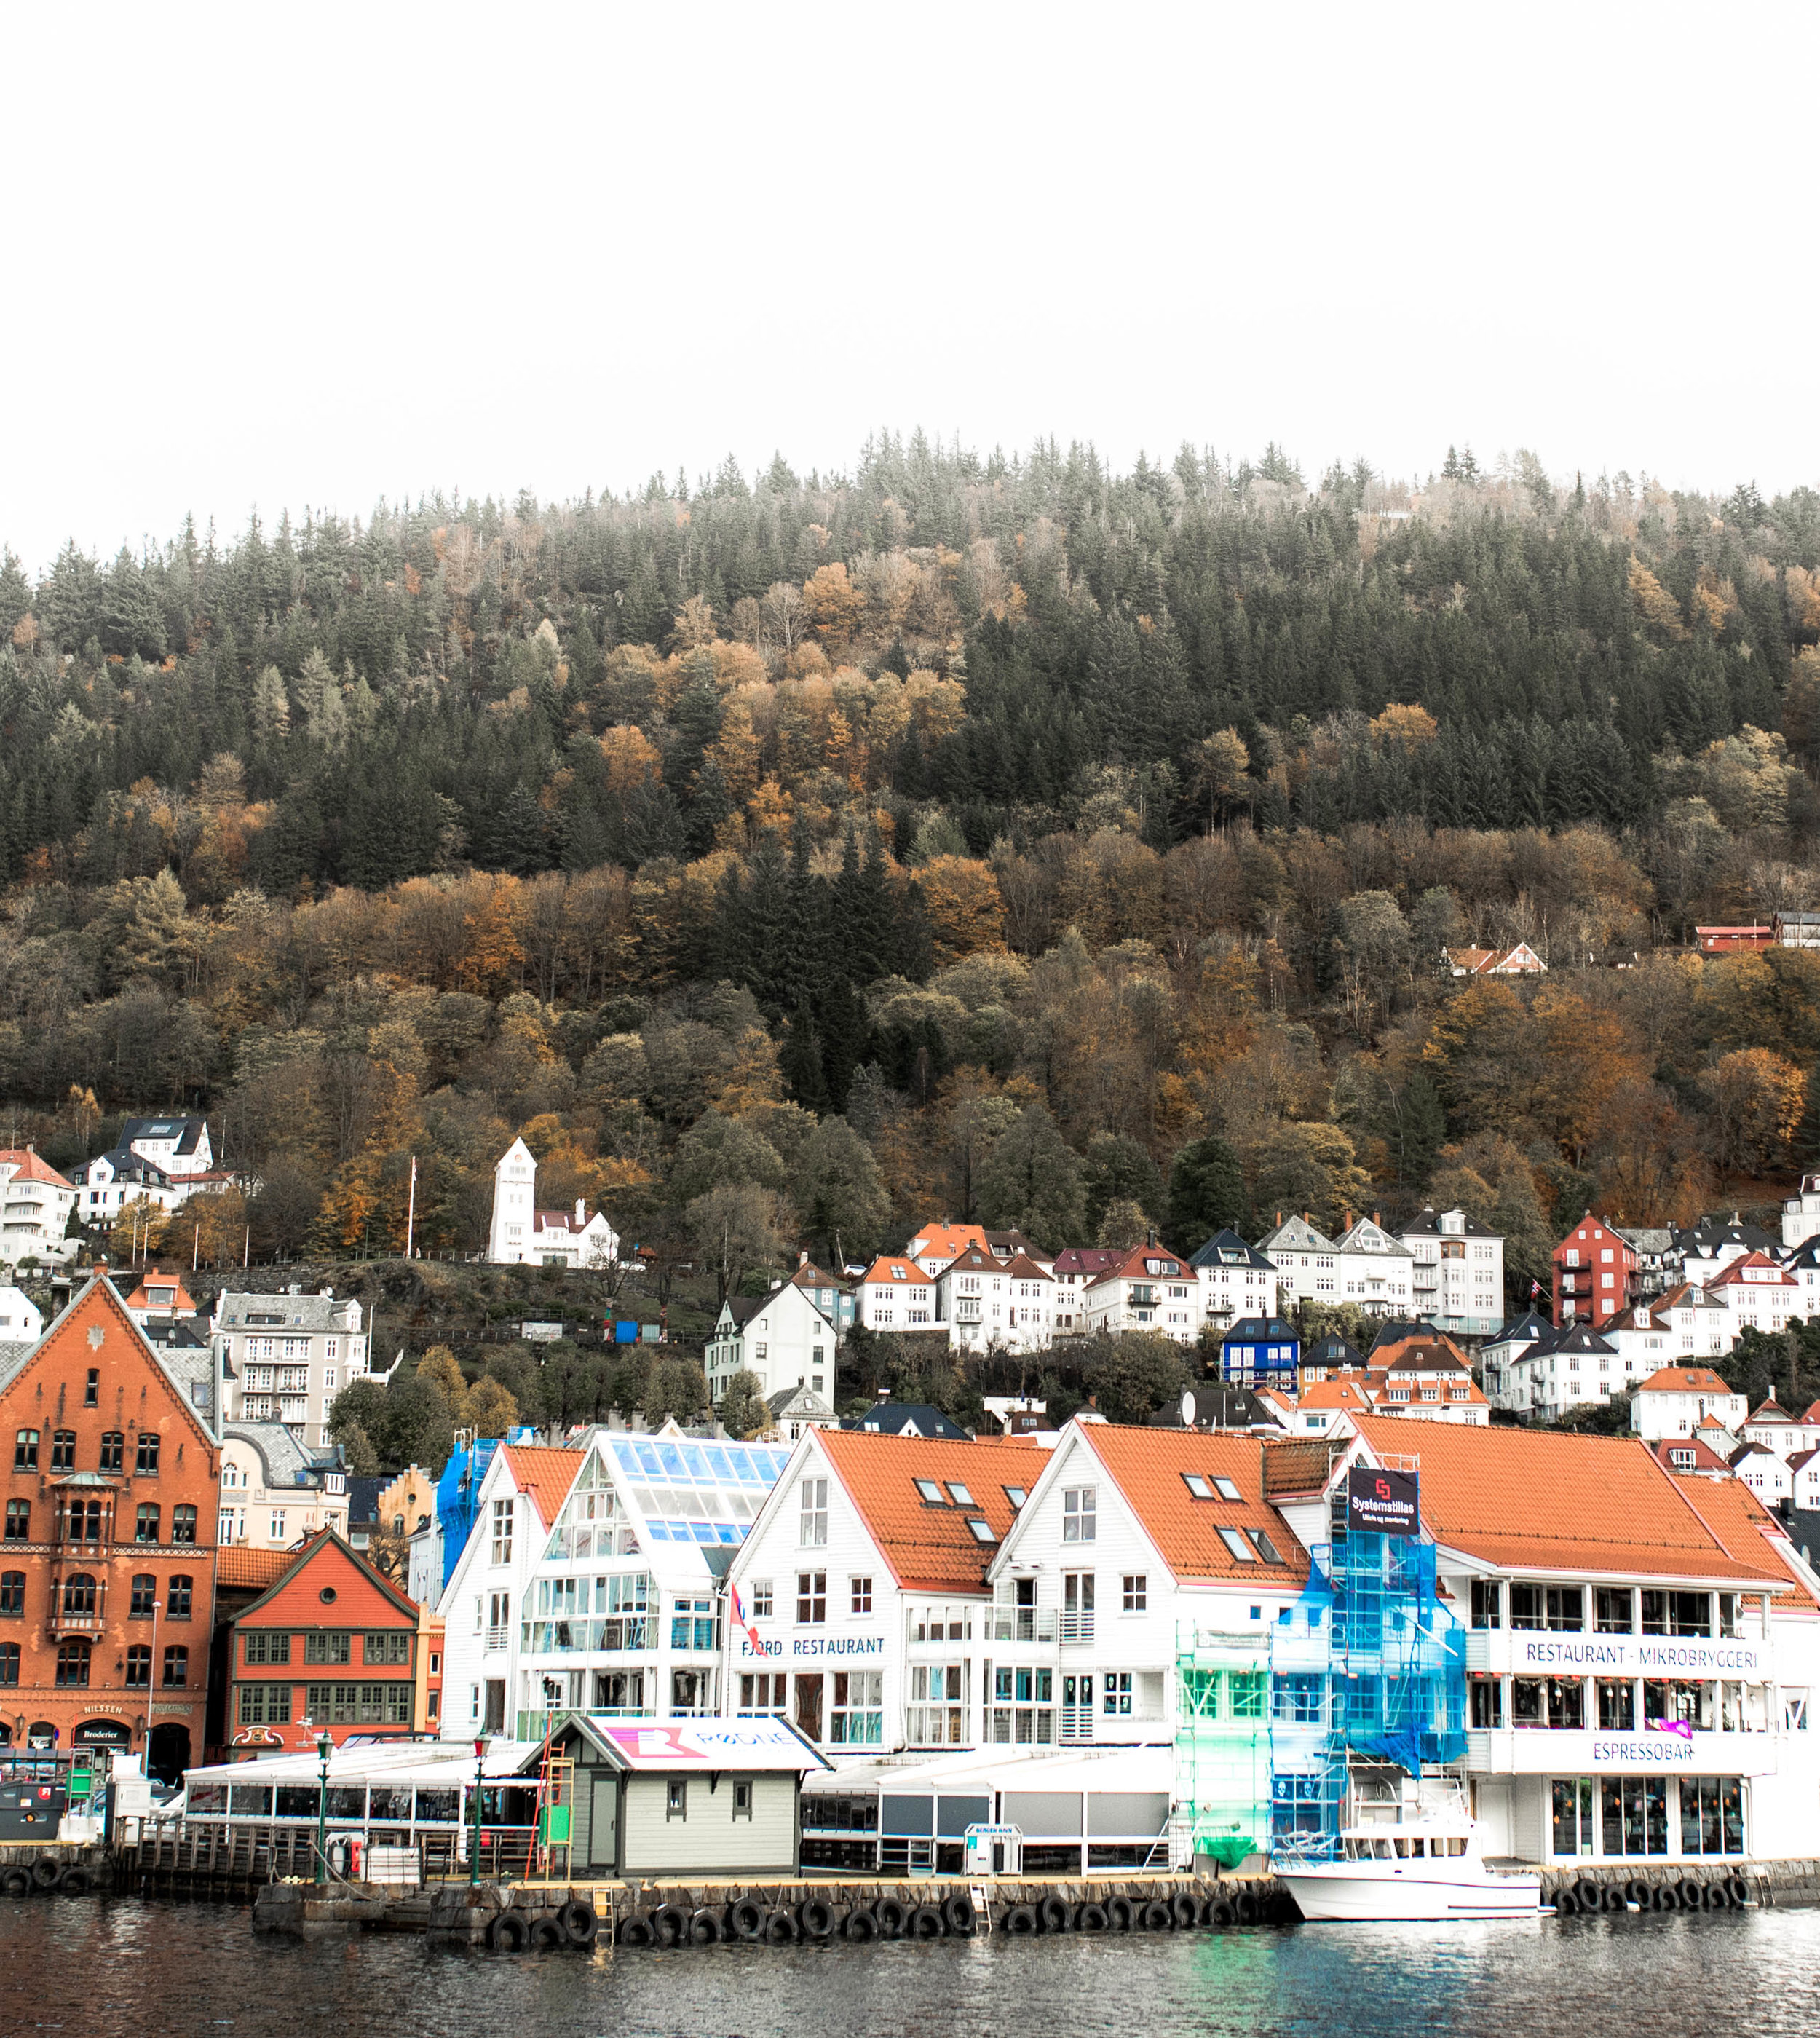 nicole-daacke-photography-norway-bergen-norway-in-a-nutshell-landscapes-elopement-photographer-photography-fall-october-norwegian-air-explore-adventure-4.jpg